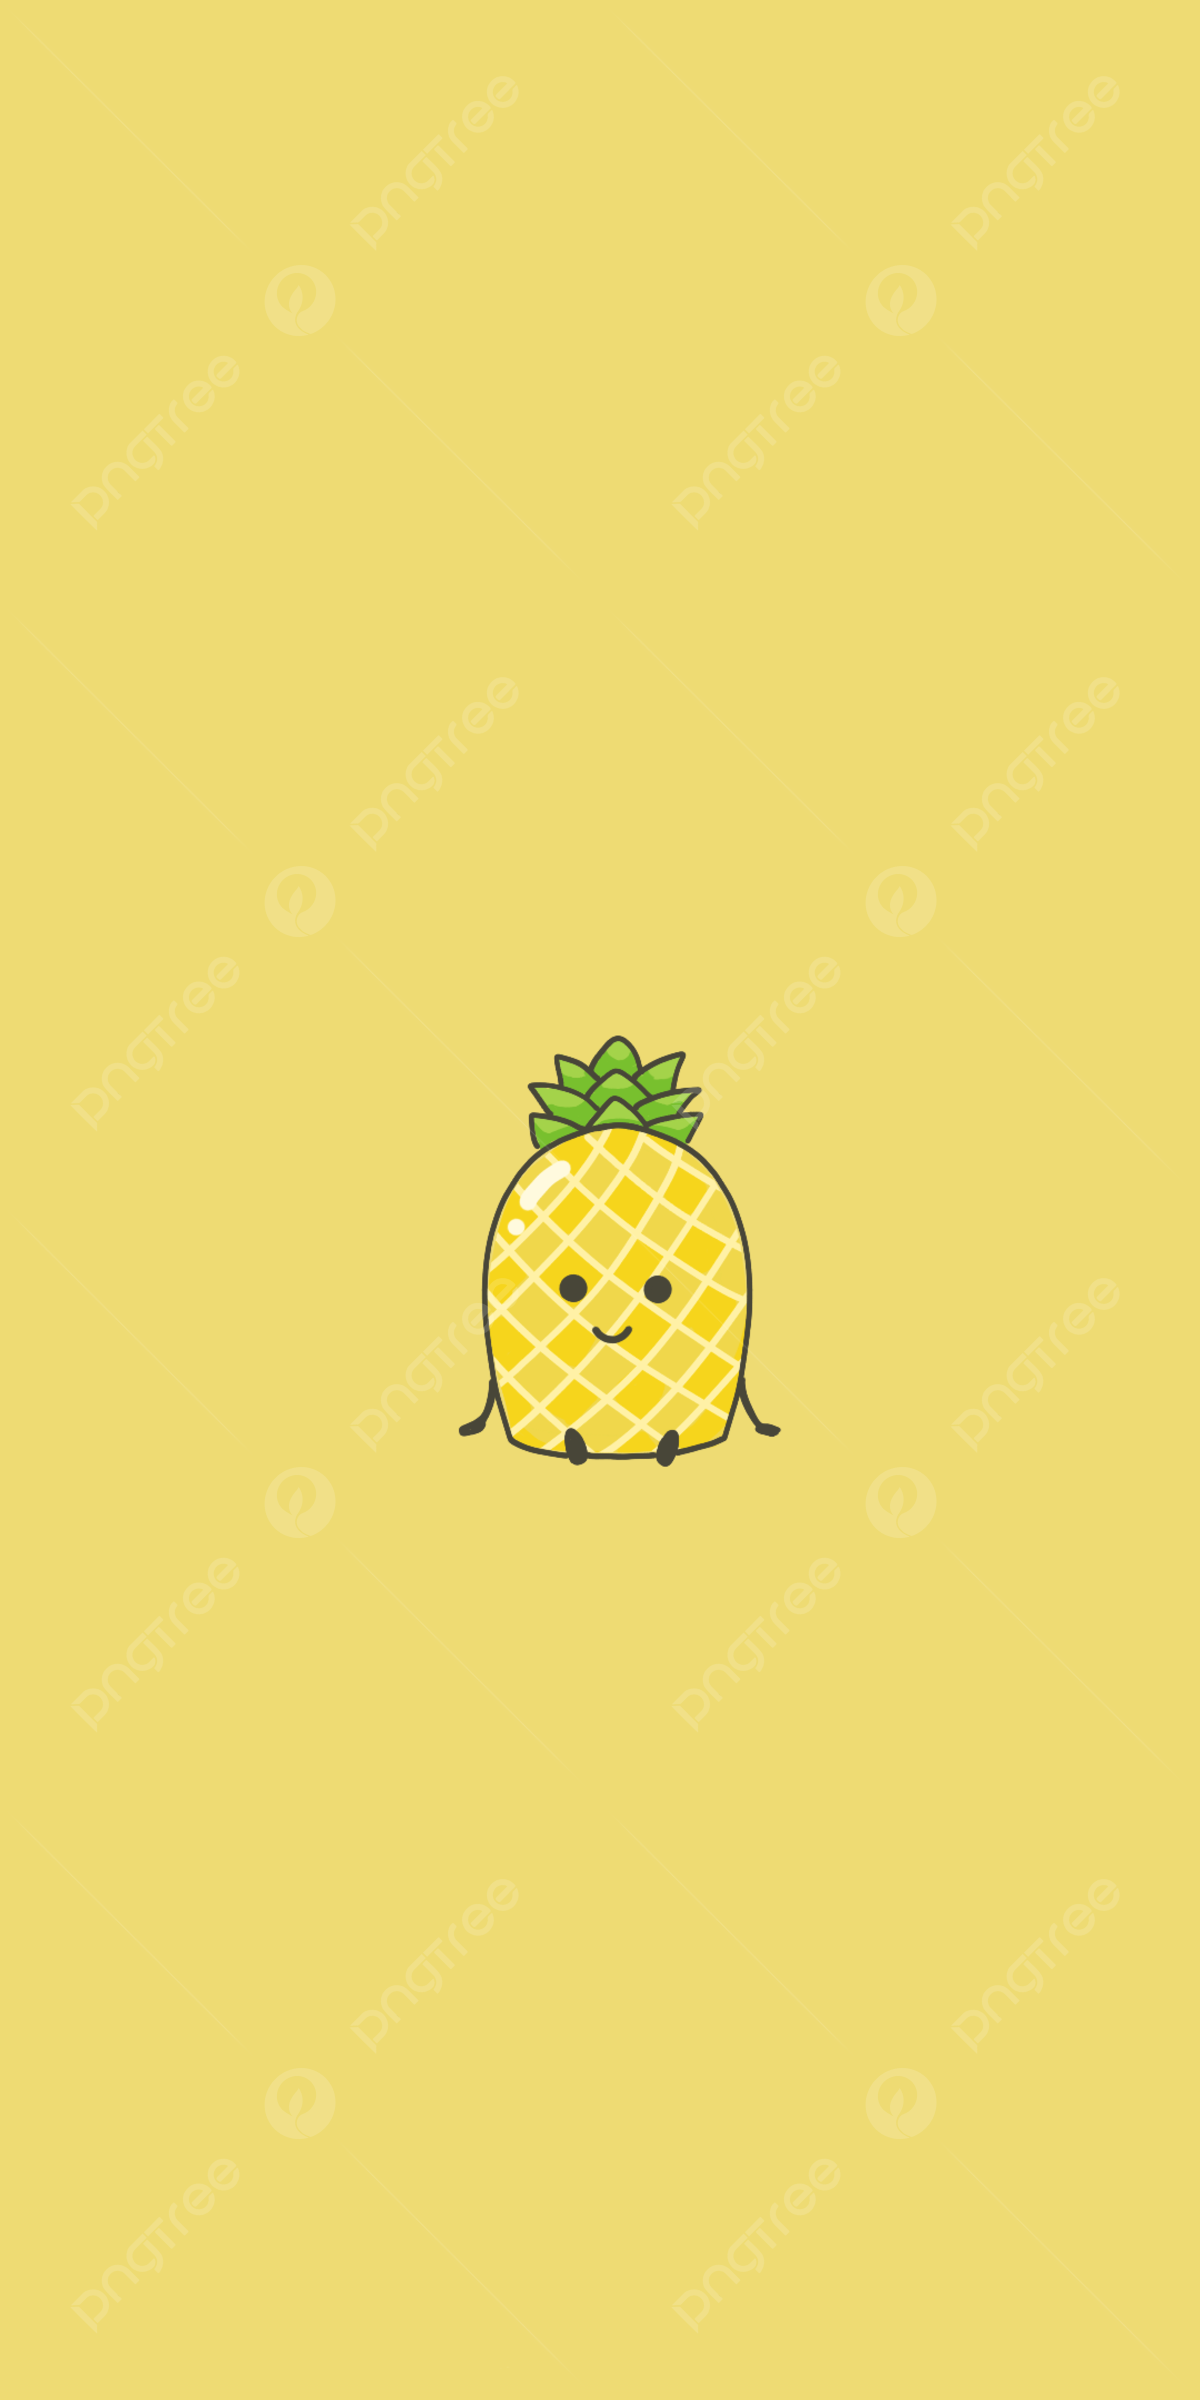 Cute pineapple mobile phone wallpaper background original fruit and vegetable yellow background image for free download